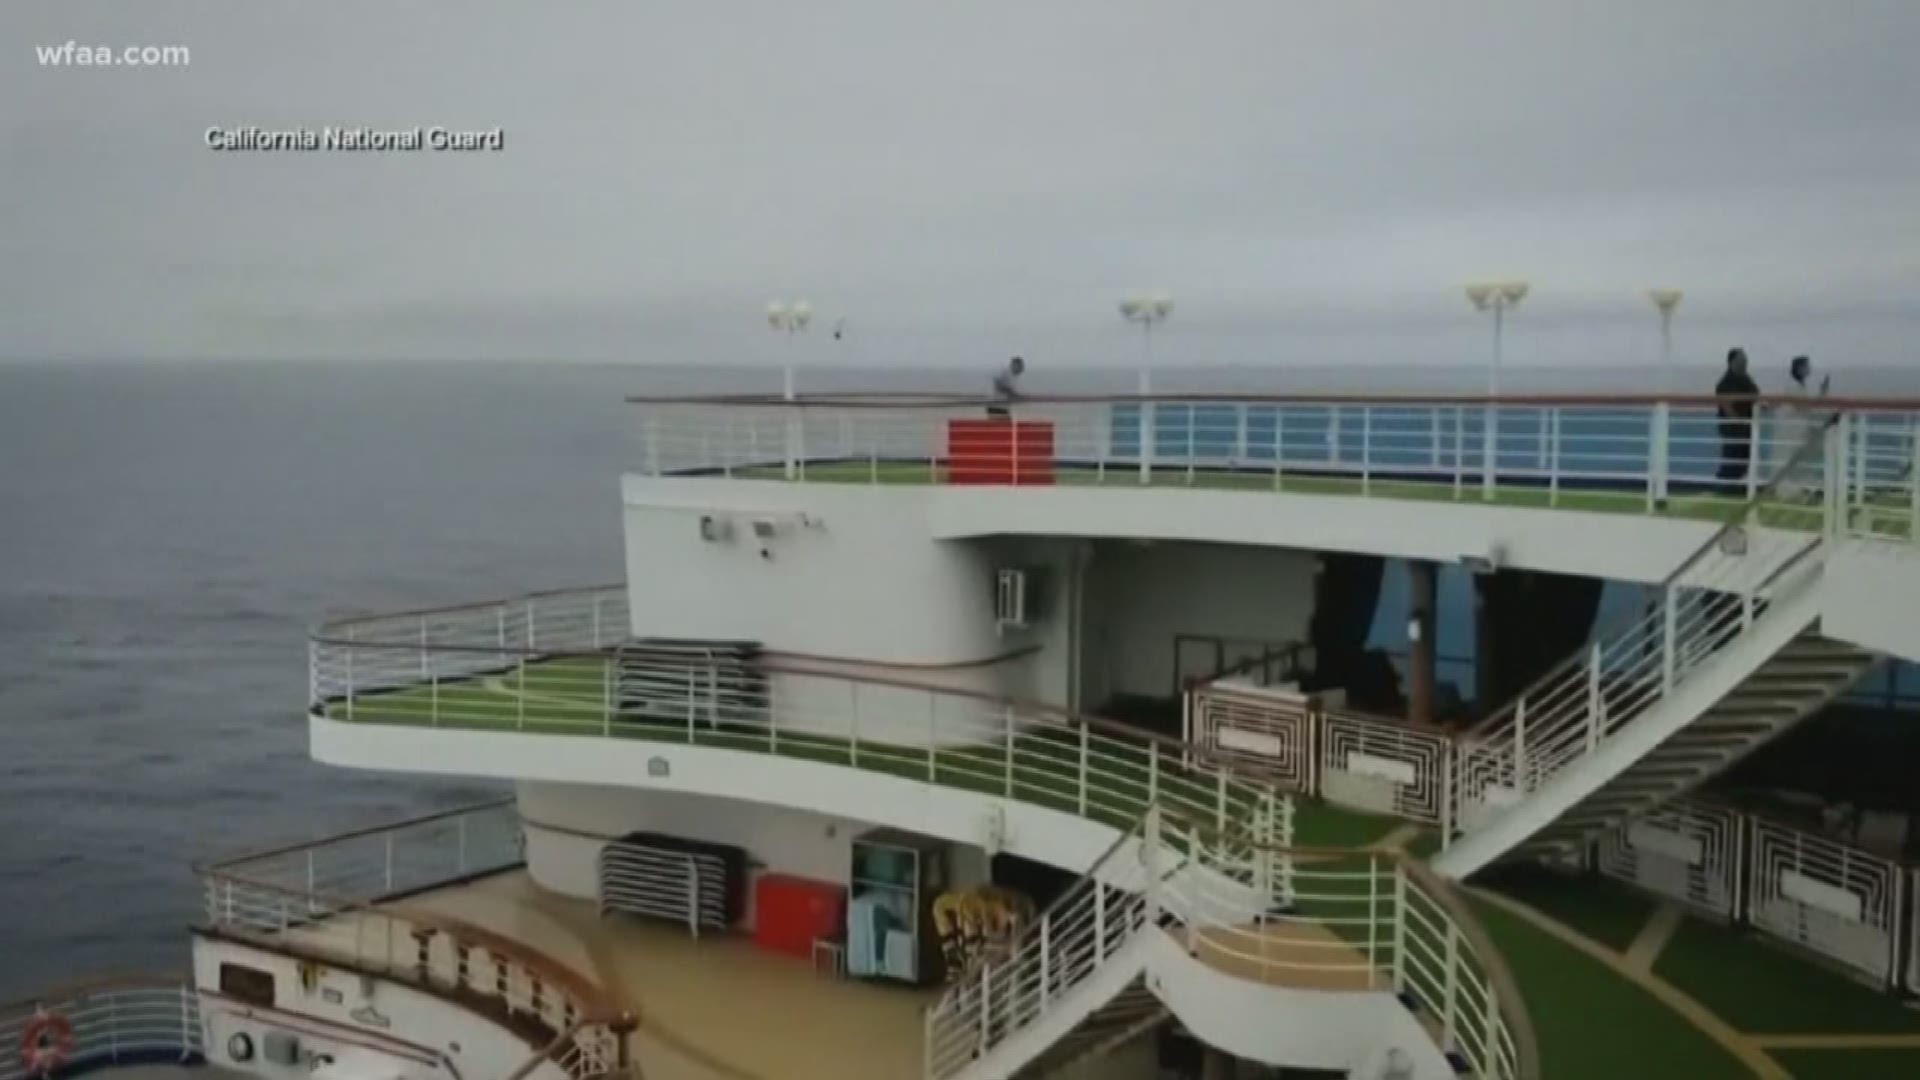 Thousands of passengers are stuck on board the ship, which was meant to be a two-week cruise between San Francisco and Hawaii, with a short stop in Mexico.